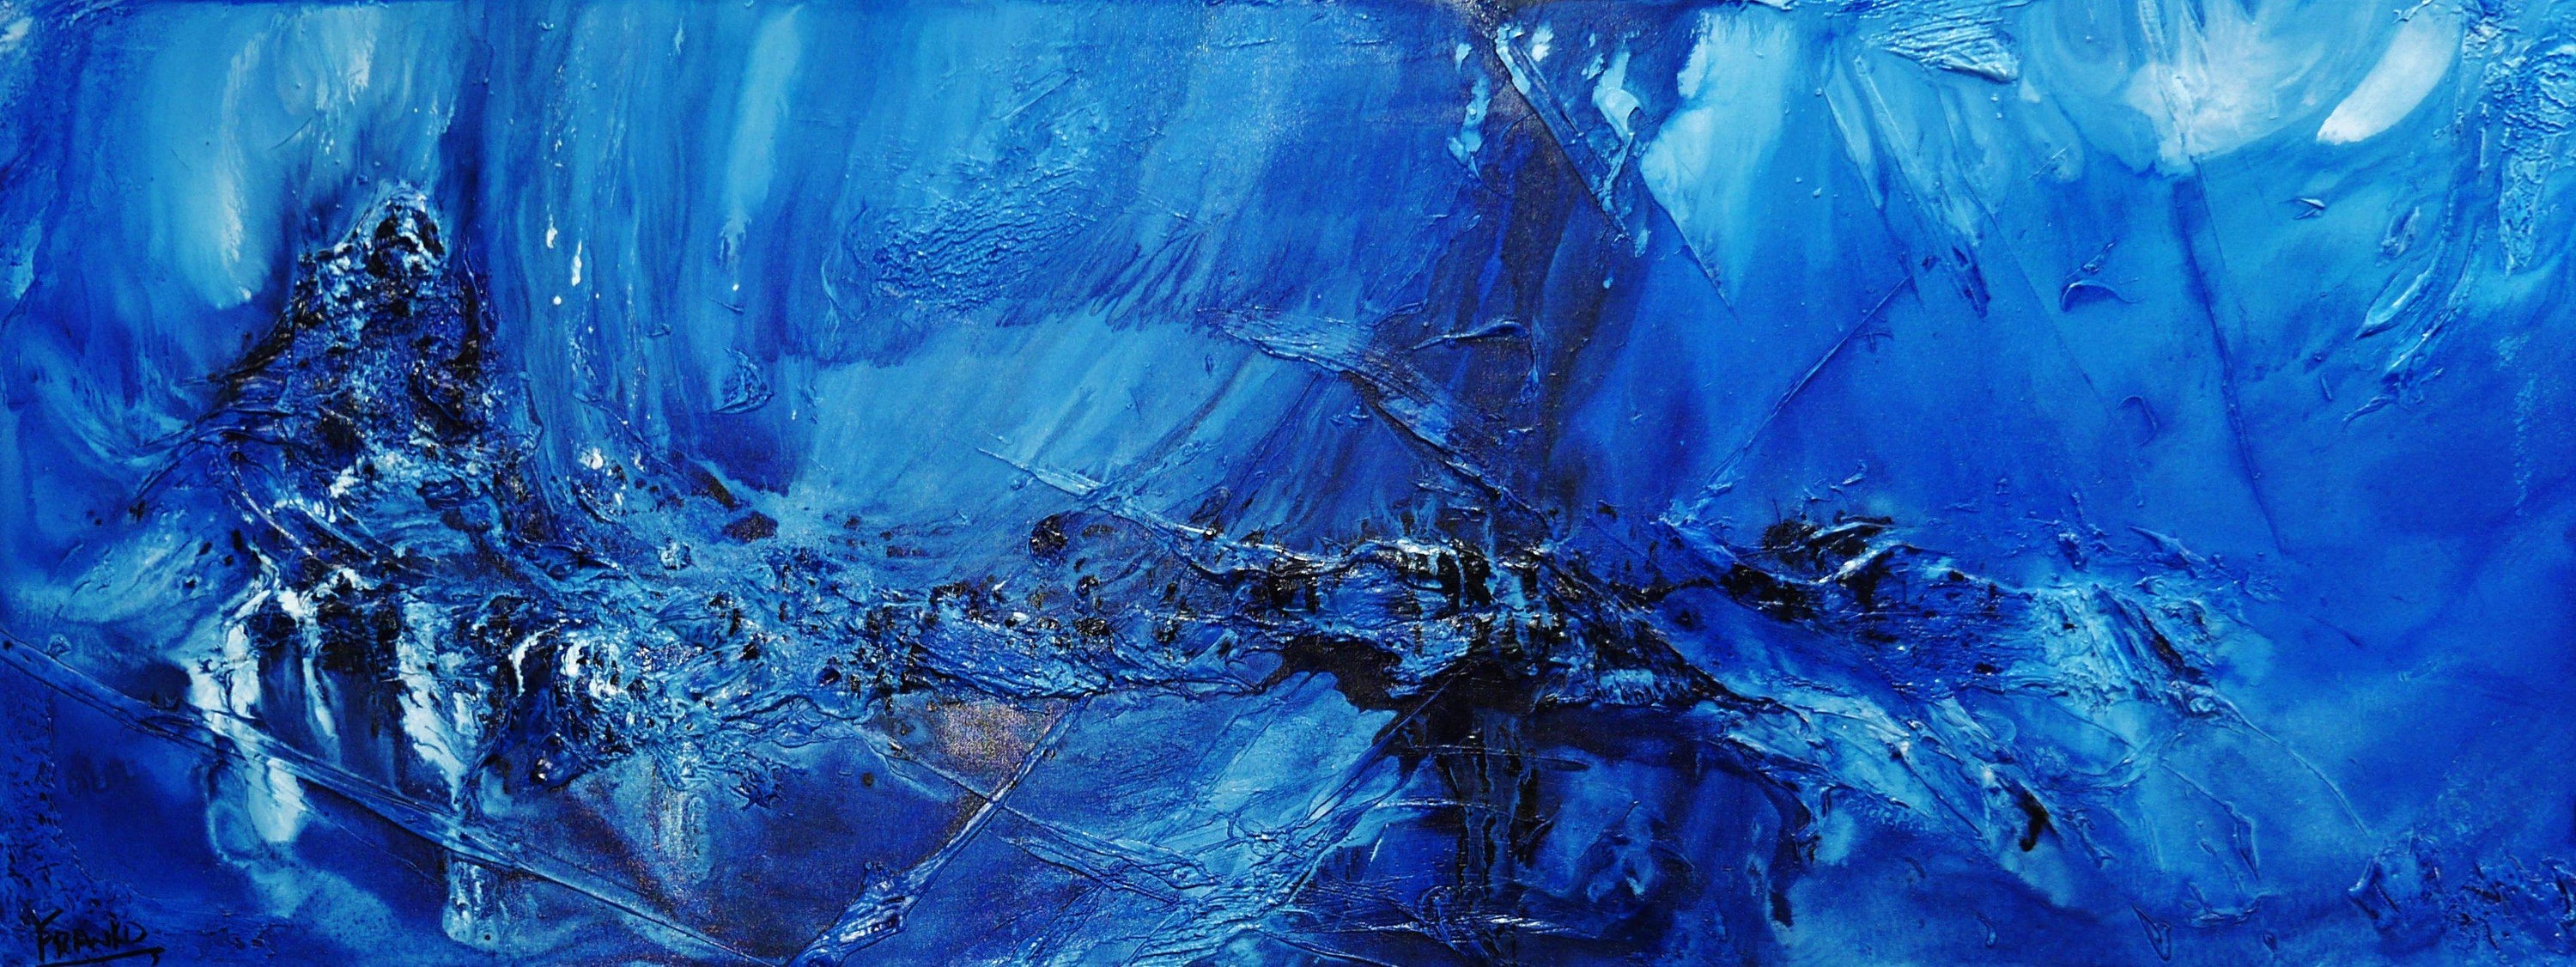 Something About Blue 160cm x 60cm Blue Textured Abstract Painting (SOLD)-Abstract-Franko-[Franko]-[Australia_Art]-[Art_Lovers_Australia]-Franklin Art Studio